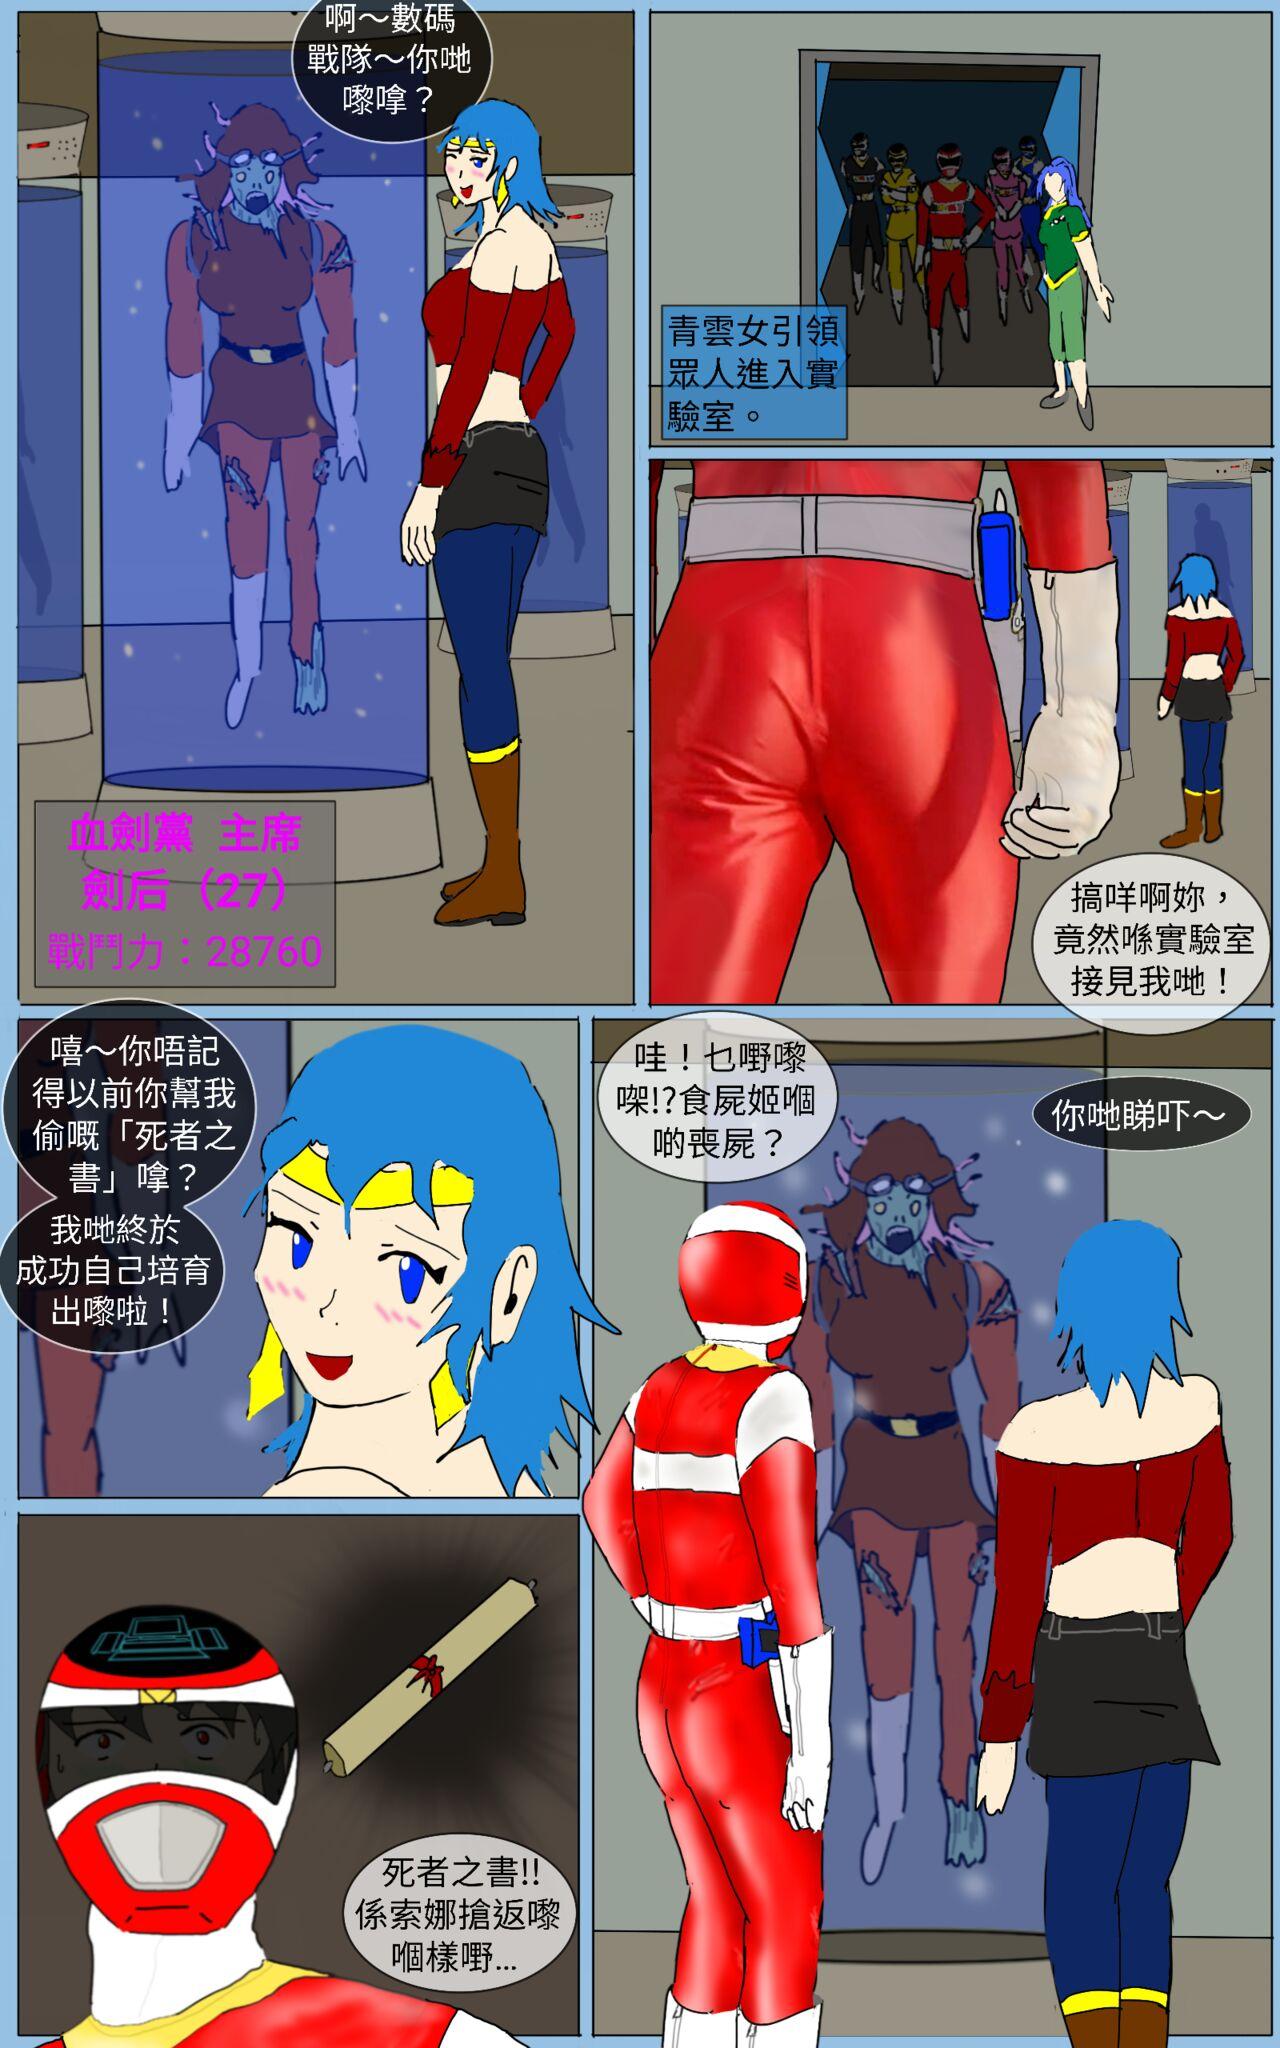 Family Roleplay Mission 32 - Super sentai Mojada - Page 3